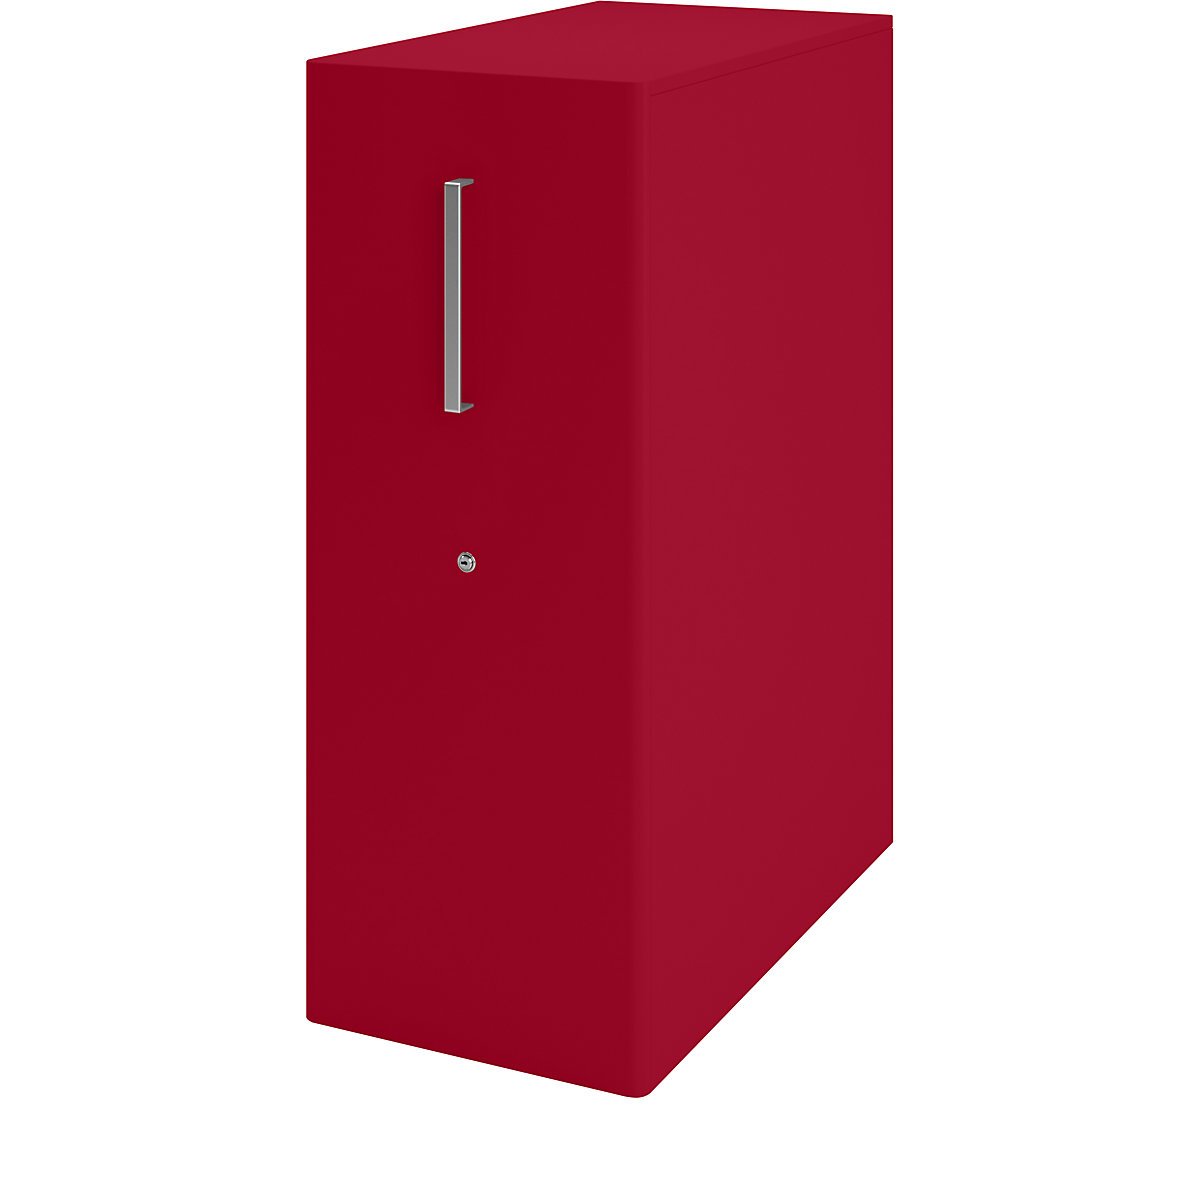 Tower™ 4 add-on furniture, with worktop – BISLEY, for the right side, 3 shelves, cardinal red-13